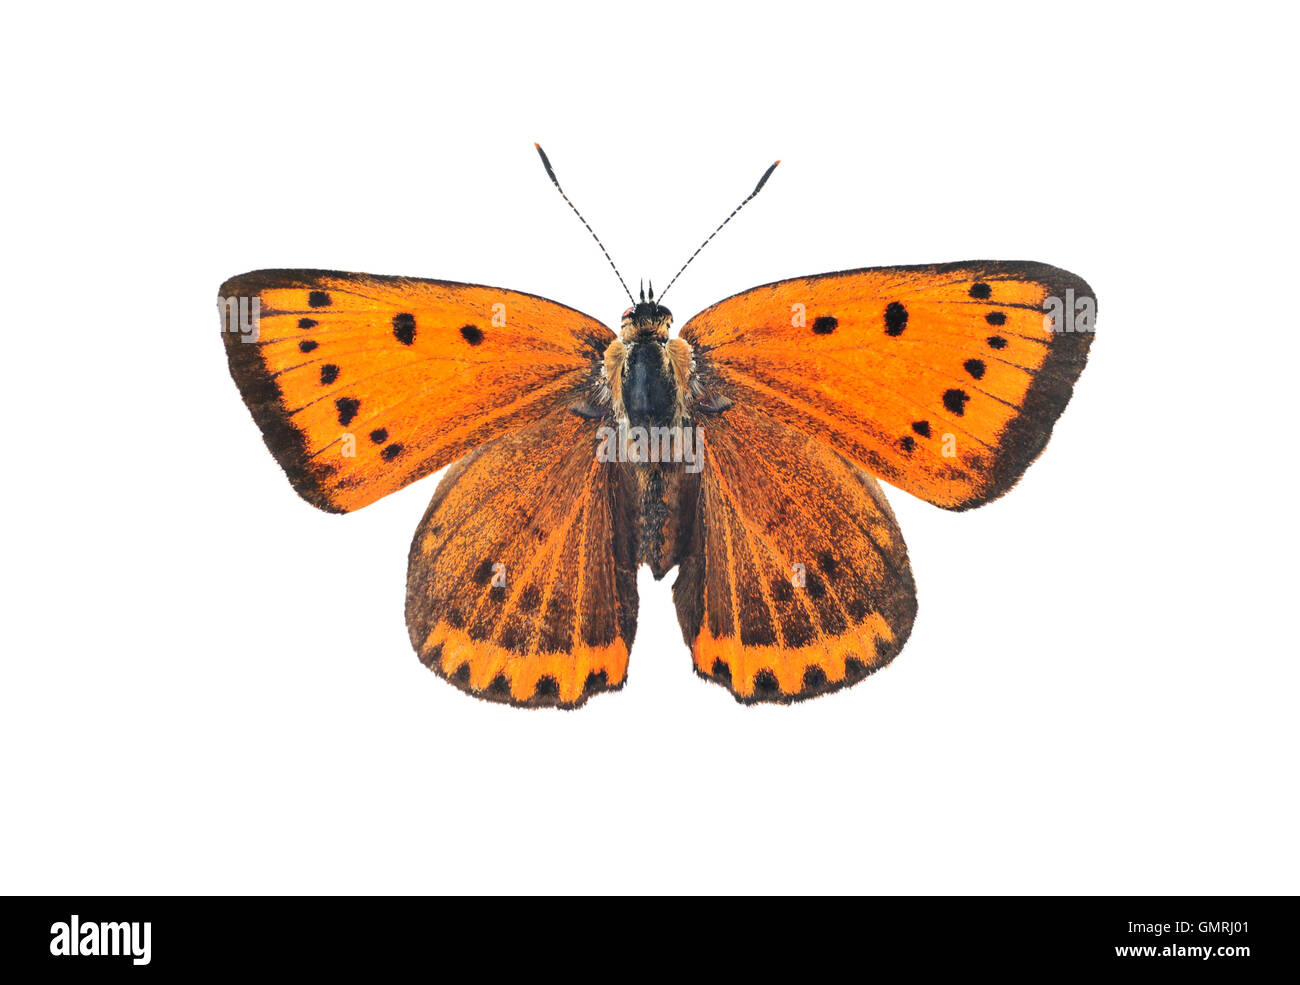 Large copper butterfly (lycaena dispar), isolated on a white background Stock Photo